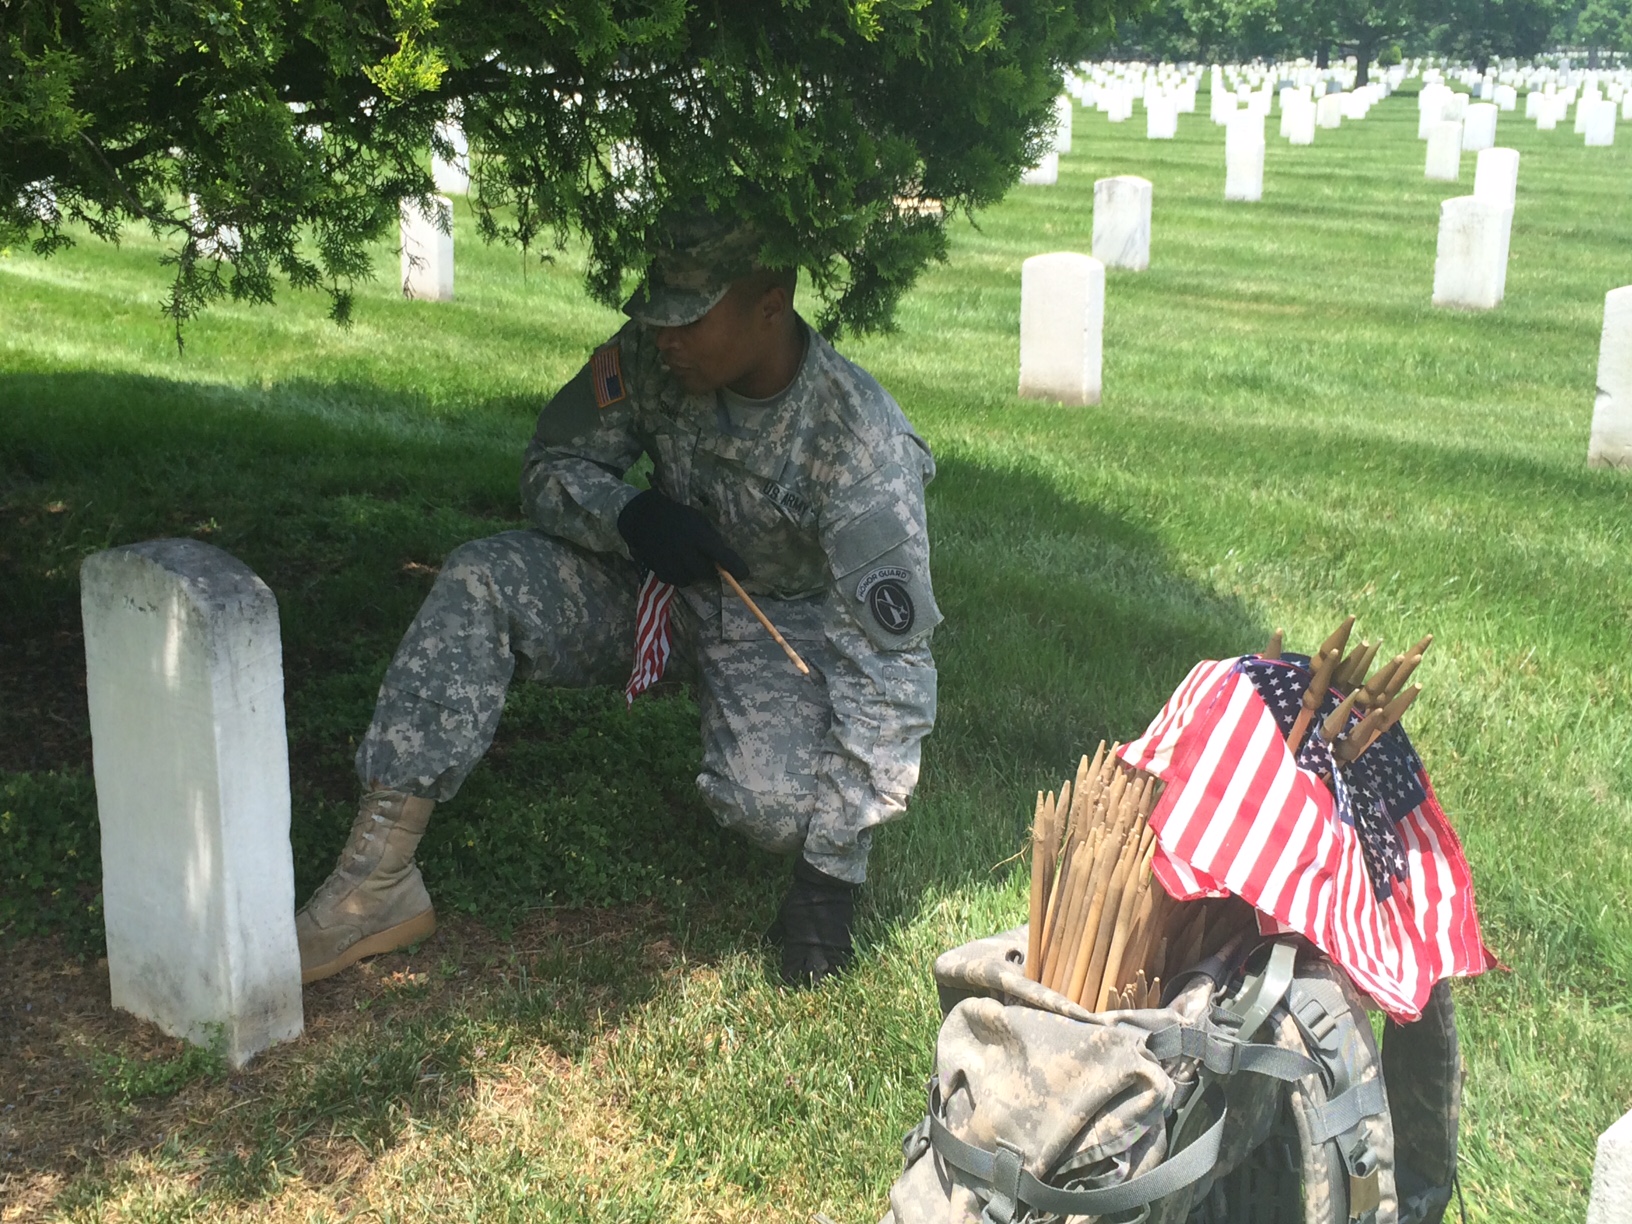 A soldier uses his boot to measure the placement of an American flag in front of a grave marker at Arlington National Cemetery on Thursday, May 26, 2016. Before Memorial Day weekend each year, the Old Guard places hundreds of thousands of flags at the cemetery to honor fallen soldiers. (WTOP/Rachel Nania)